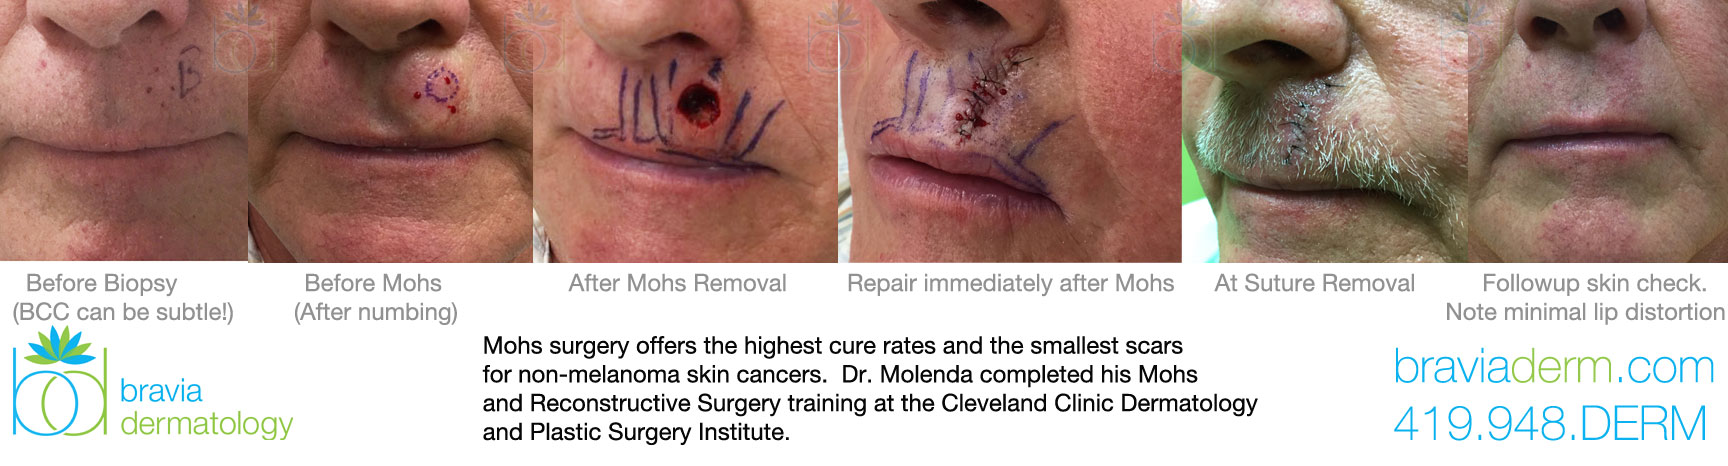 Mohs Surgery offers the highest cure rates and the smallest scars.